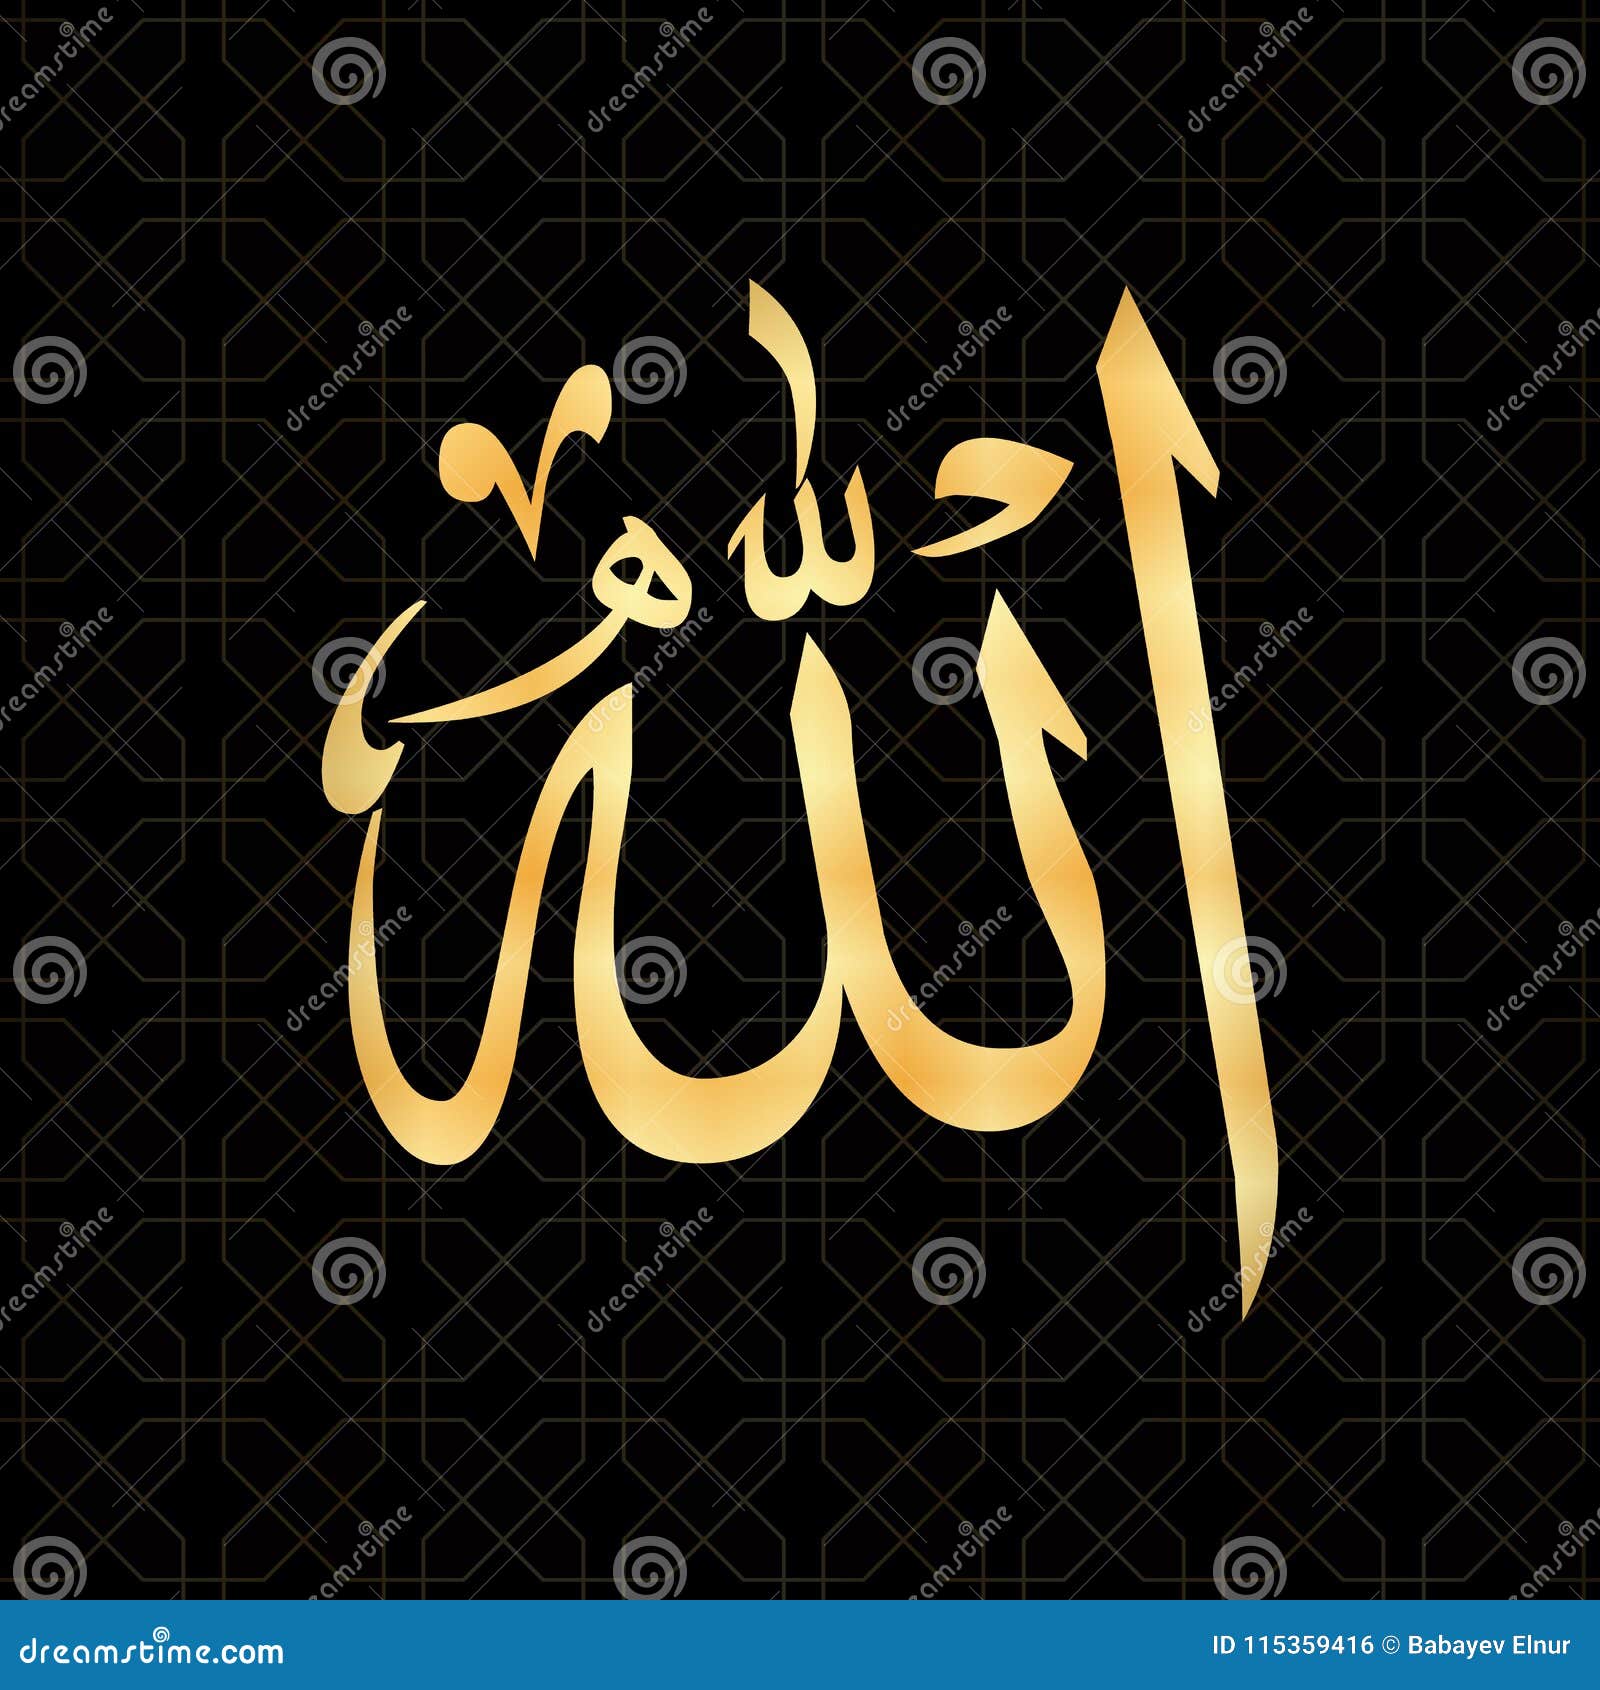 Islamic Calligraphy Allah Can Be Used for the Design of Holidays ...